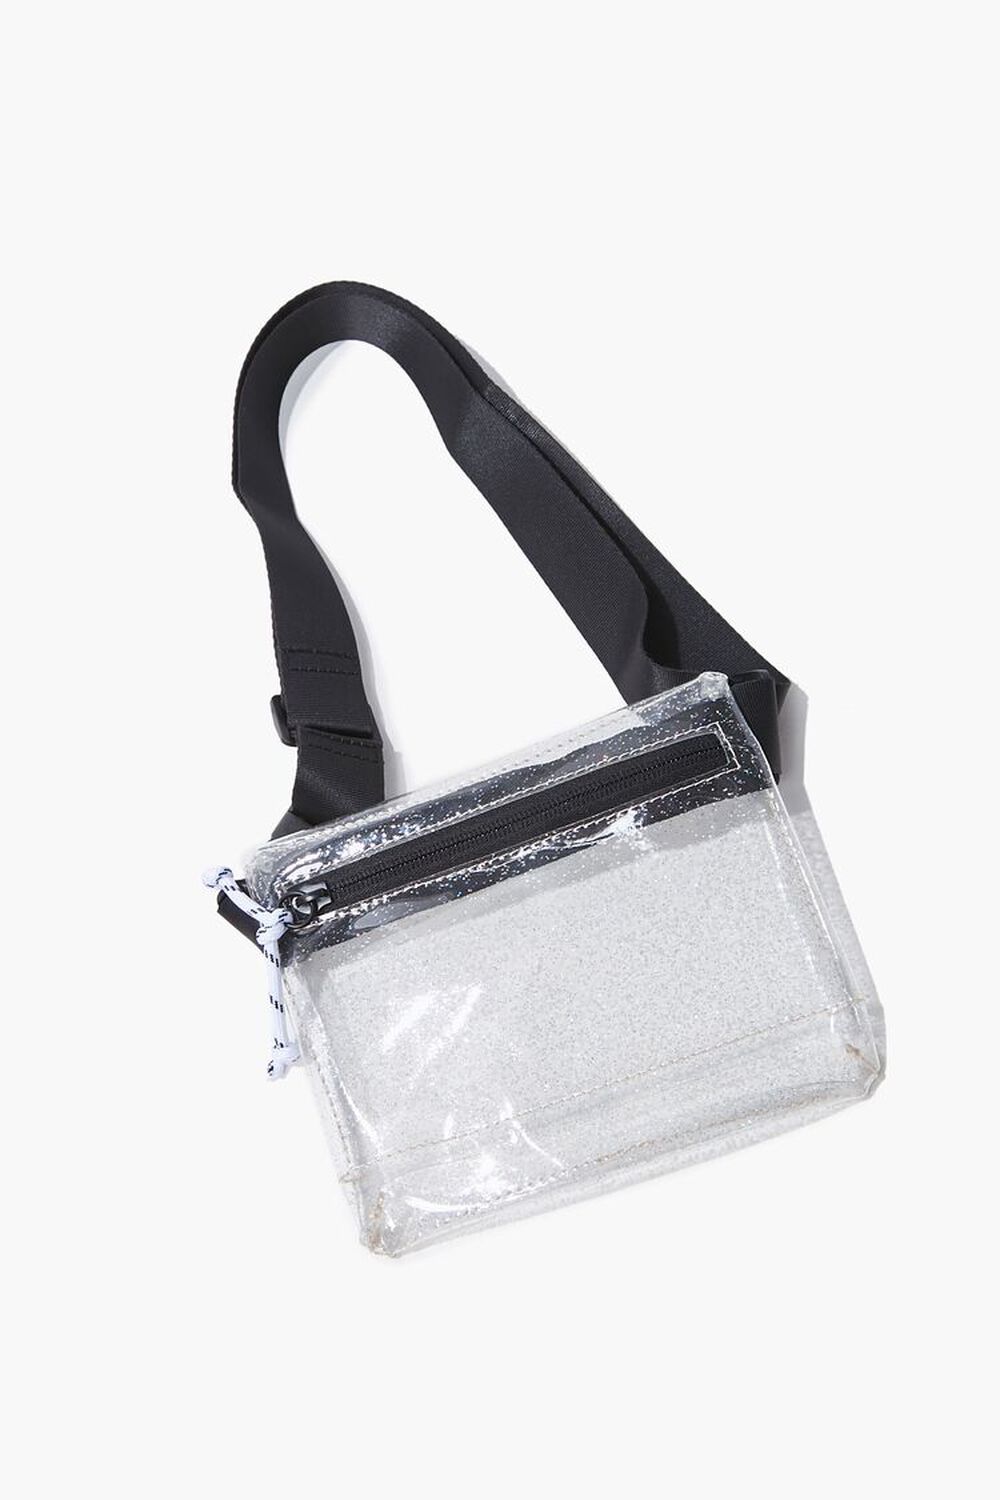 CLEAR/MULTI Glittered Transparent Fanny Pack, image 1